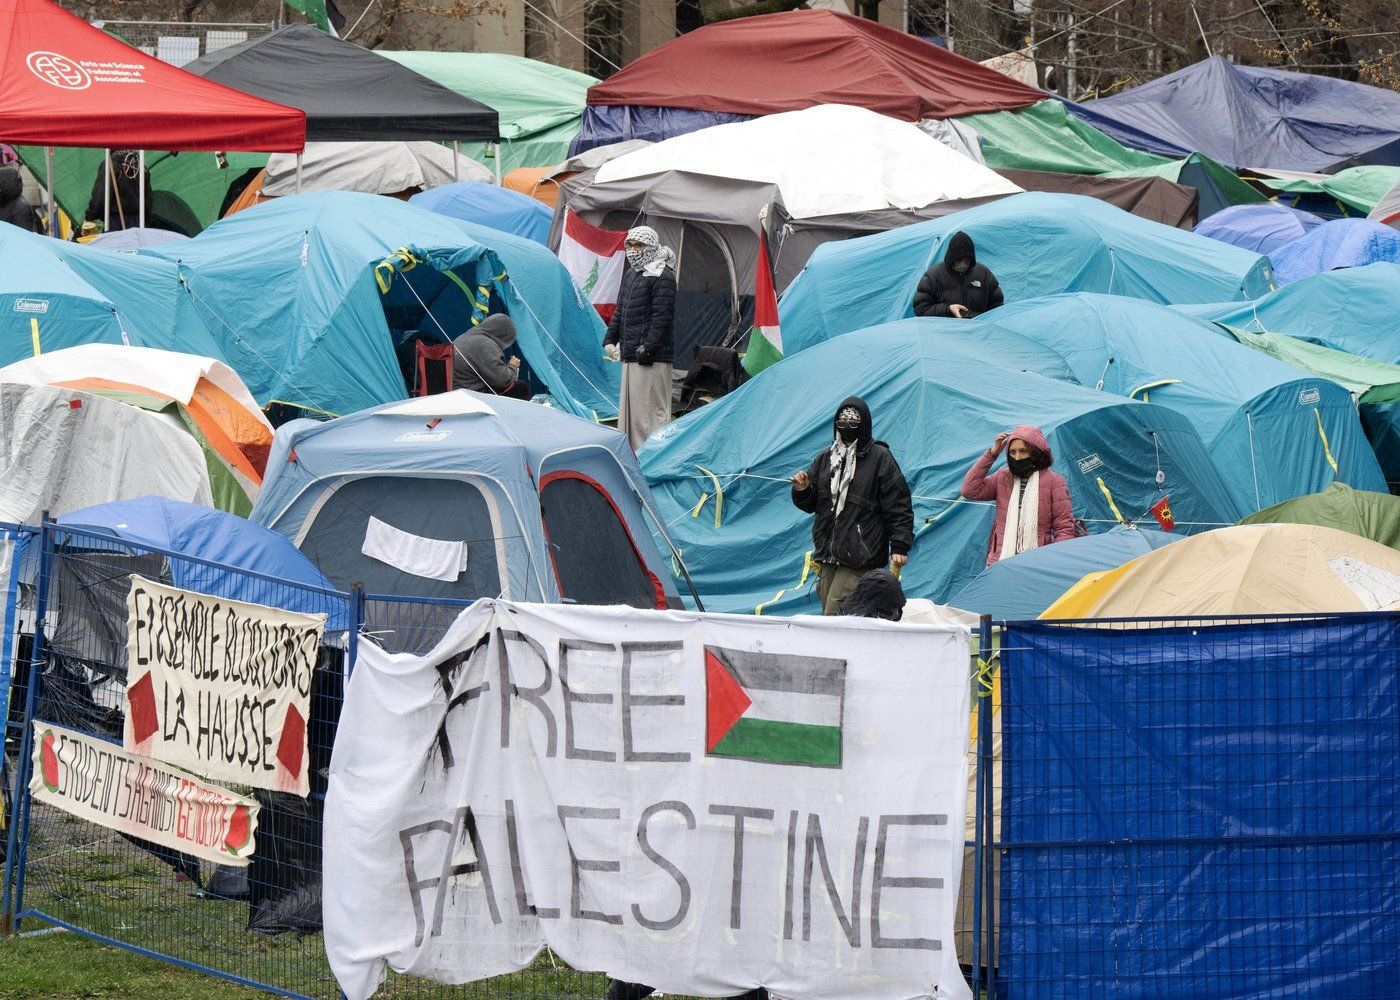 Pro-Palestinian student encampment planned for U of M